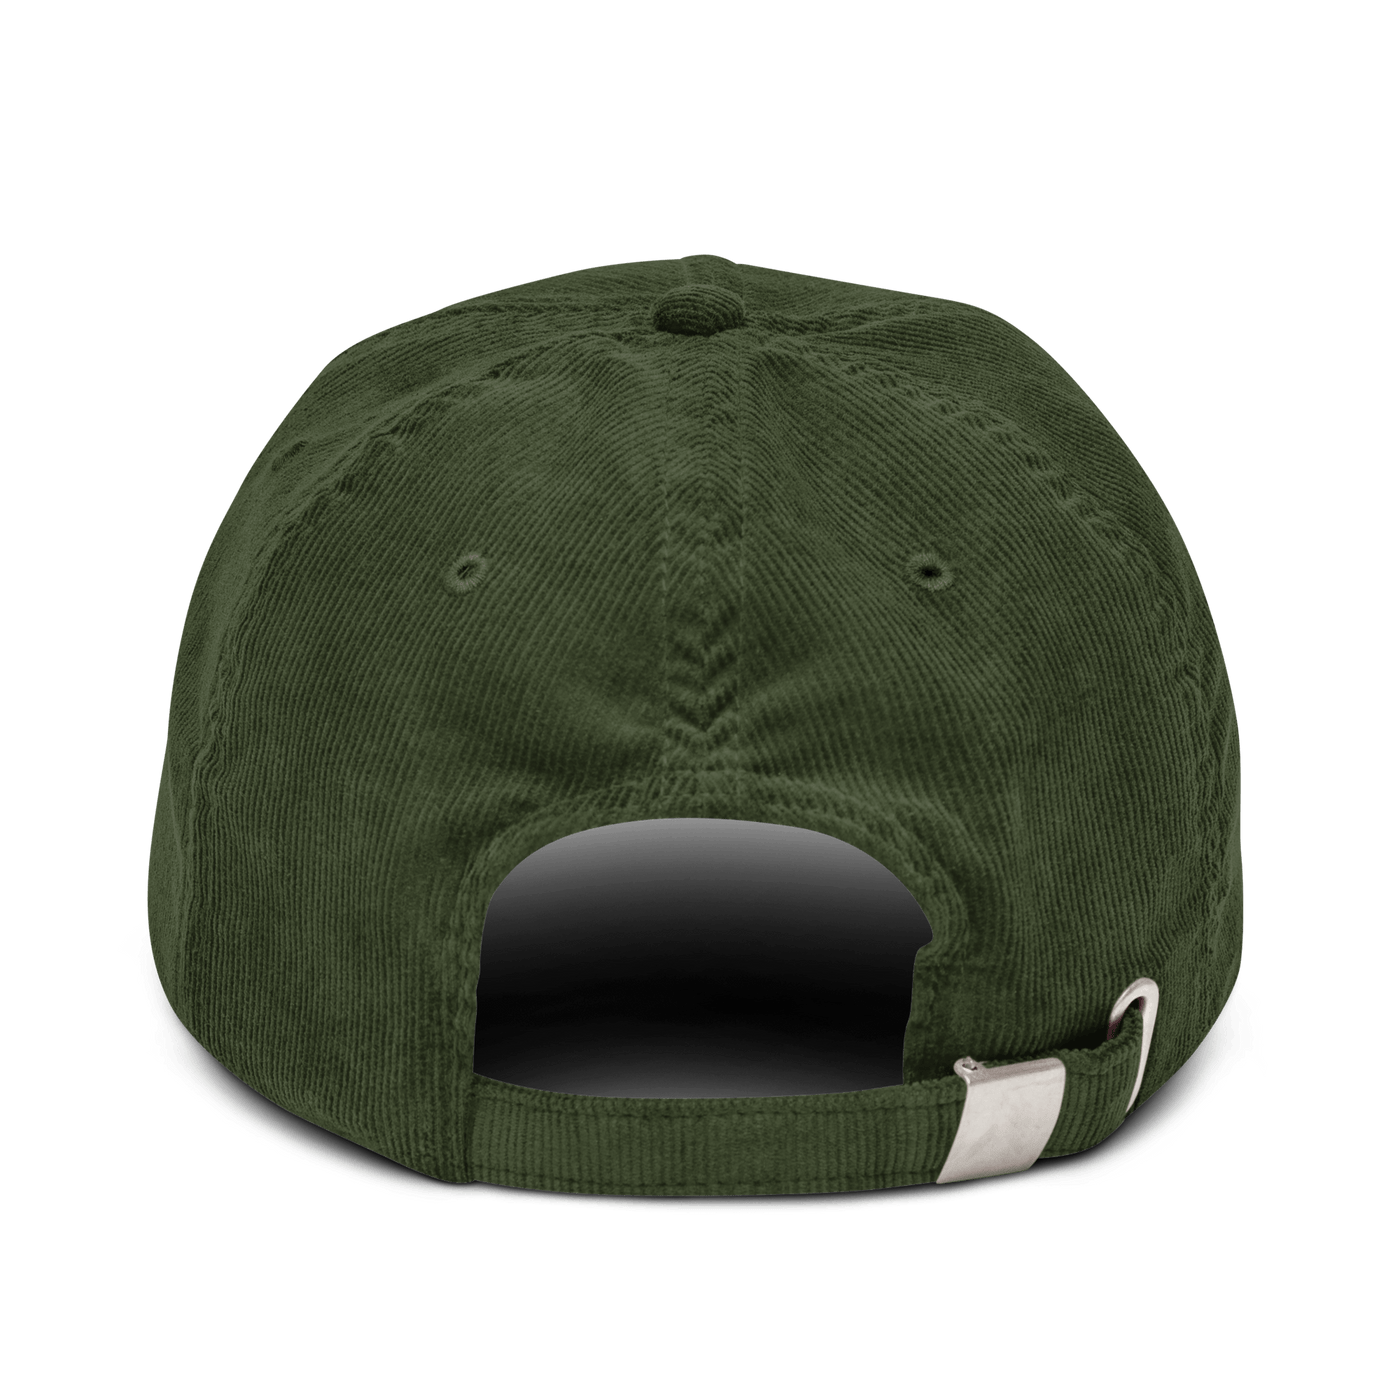 UFO Corduroy hat - Dark Olive - - Just Another Cap Store